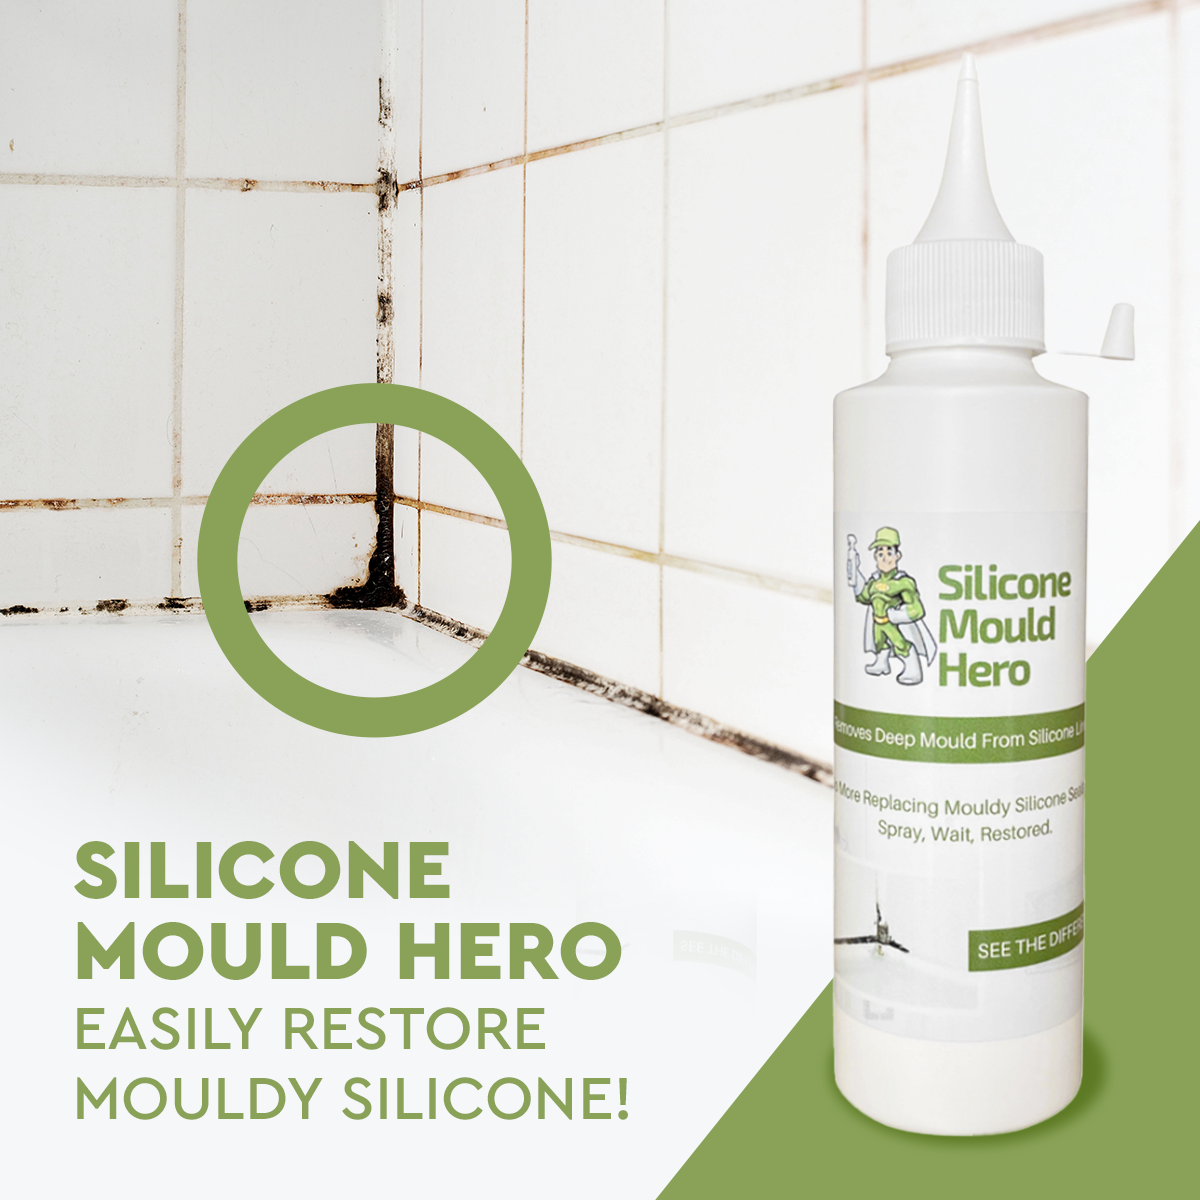 Silicone Mould Hero